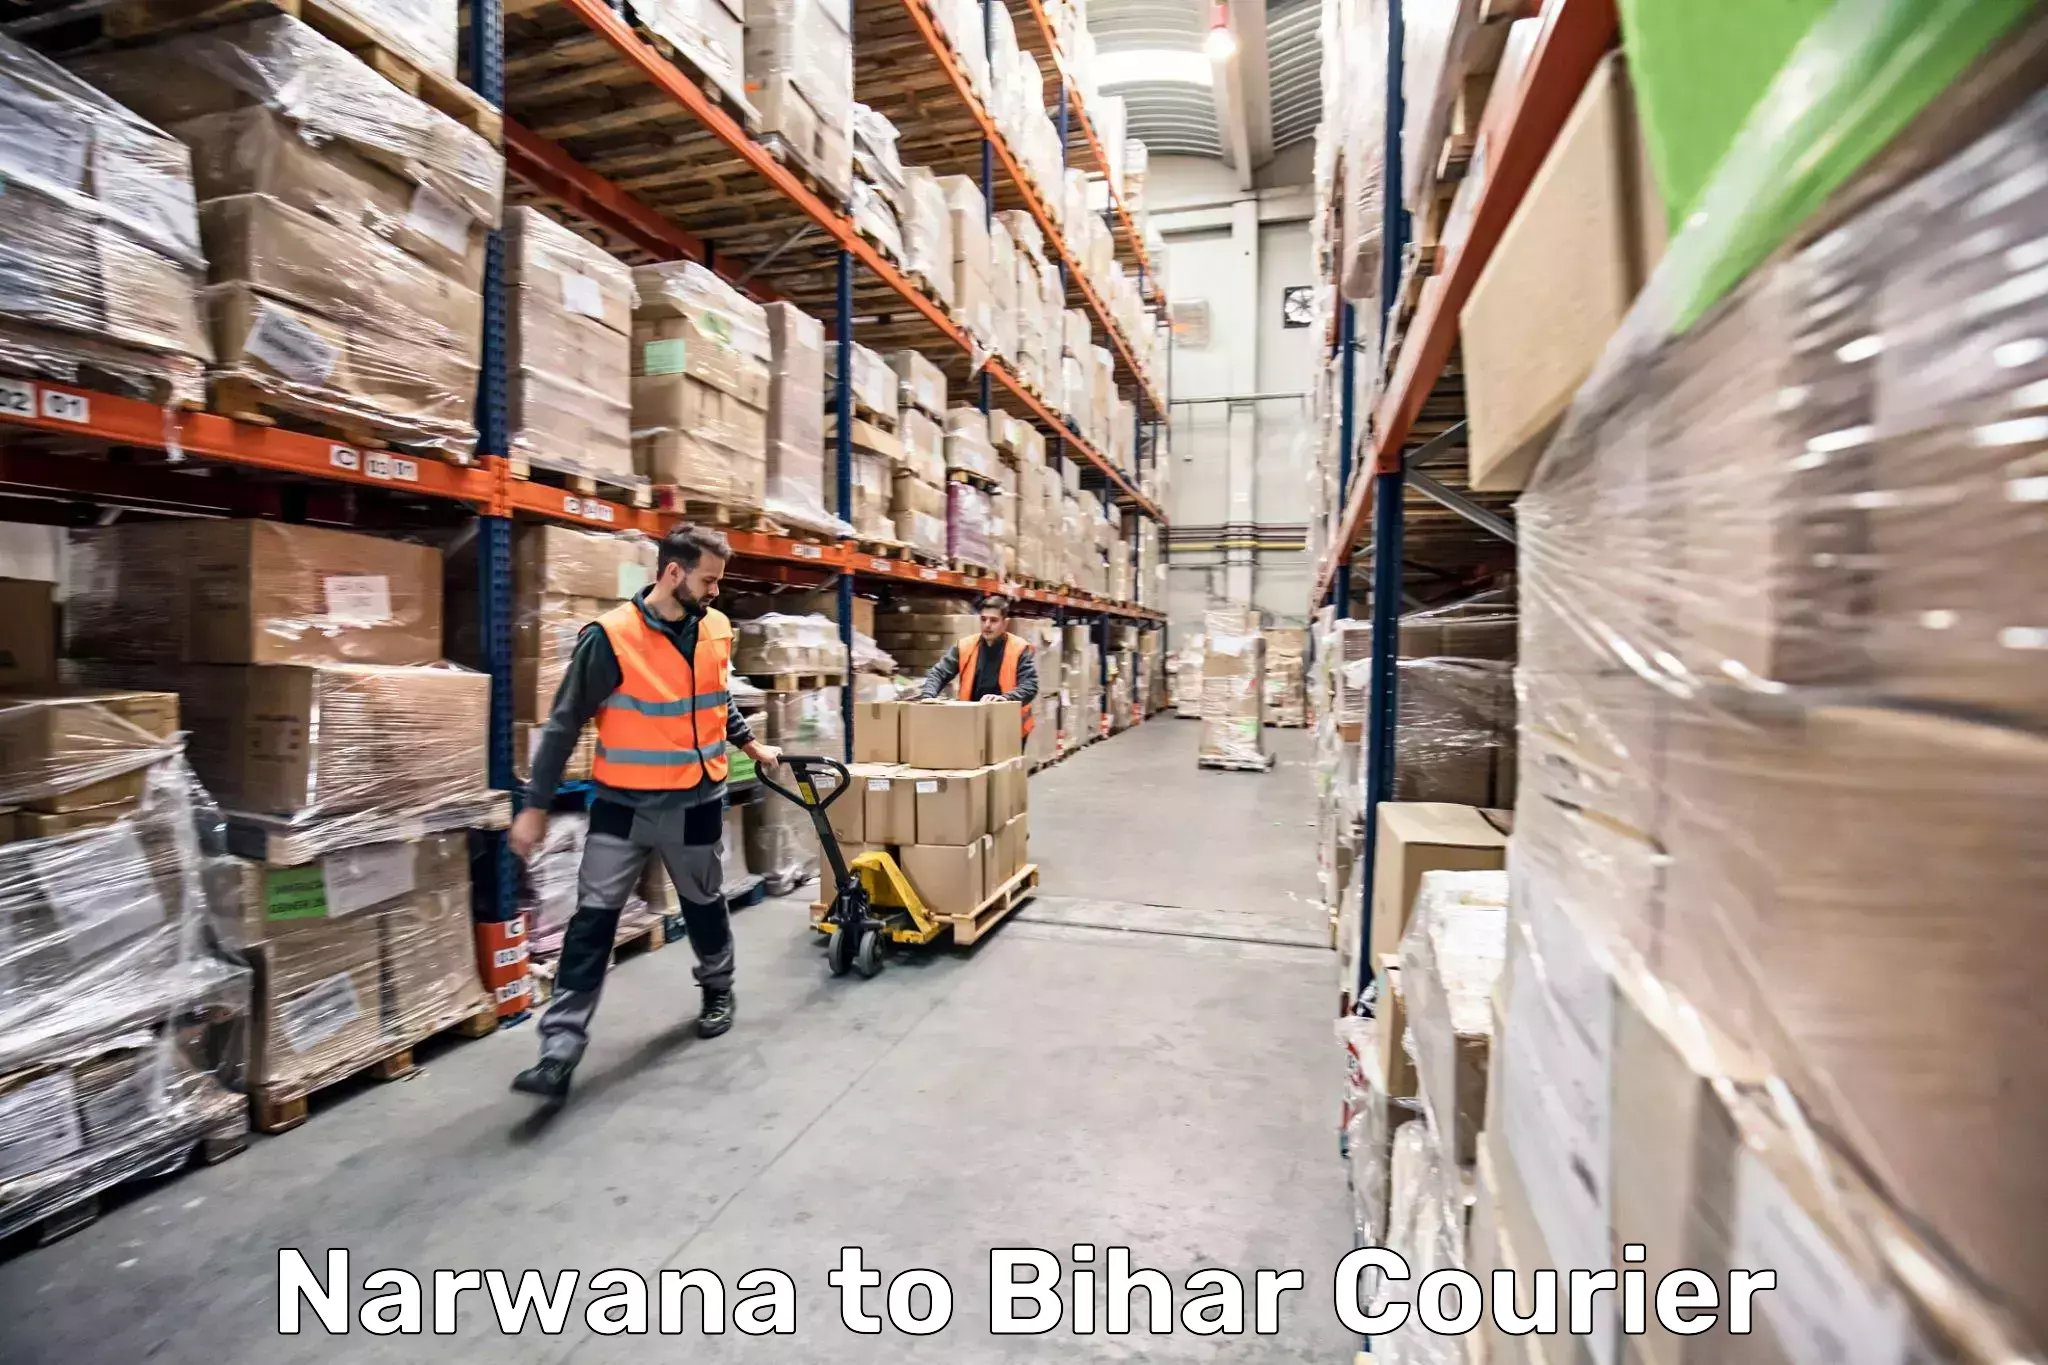 Instant baggage transport quote Narwana to Bihar